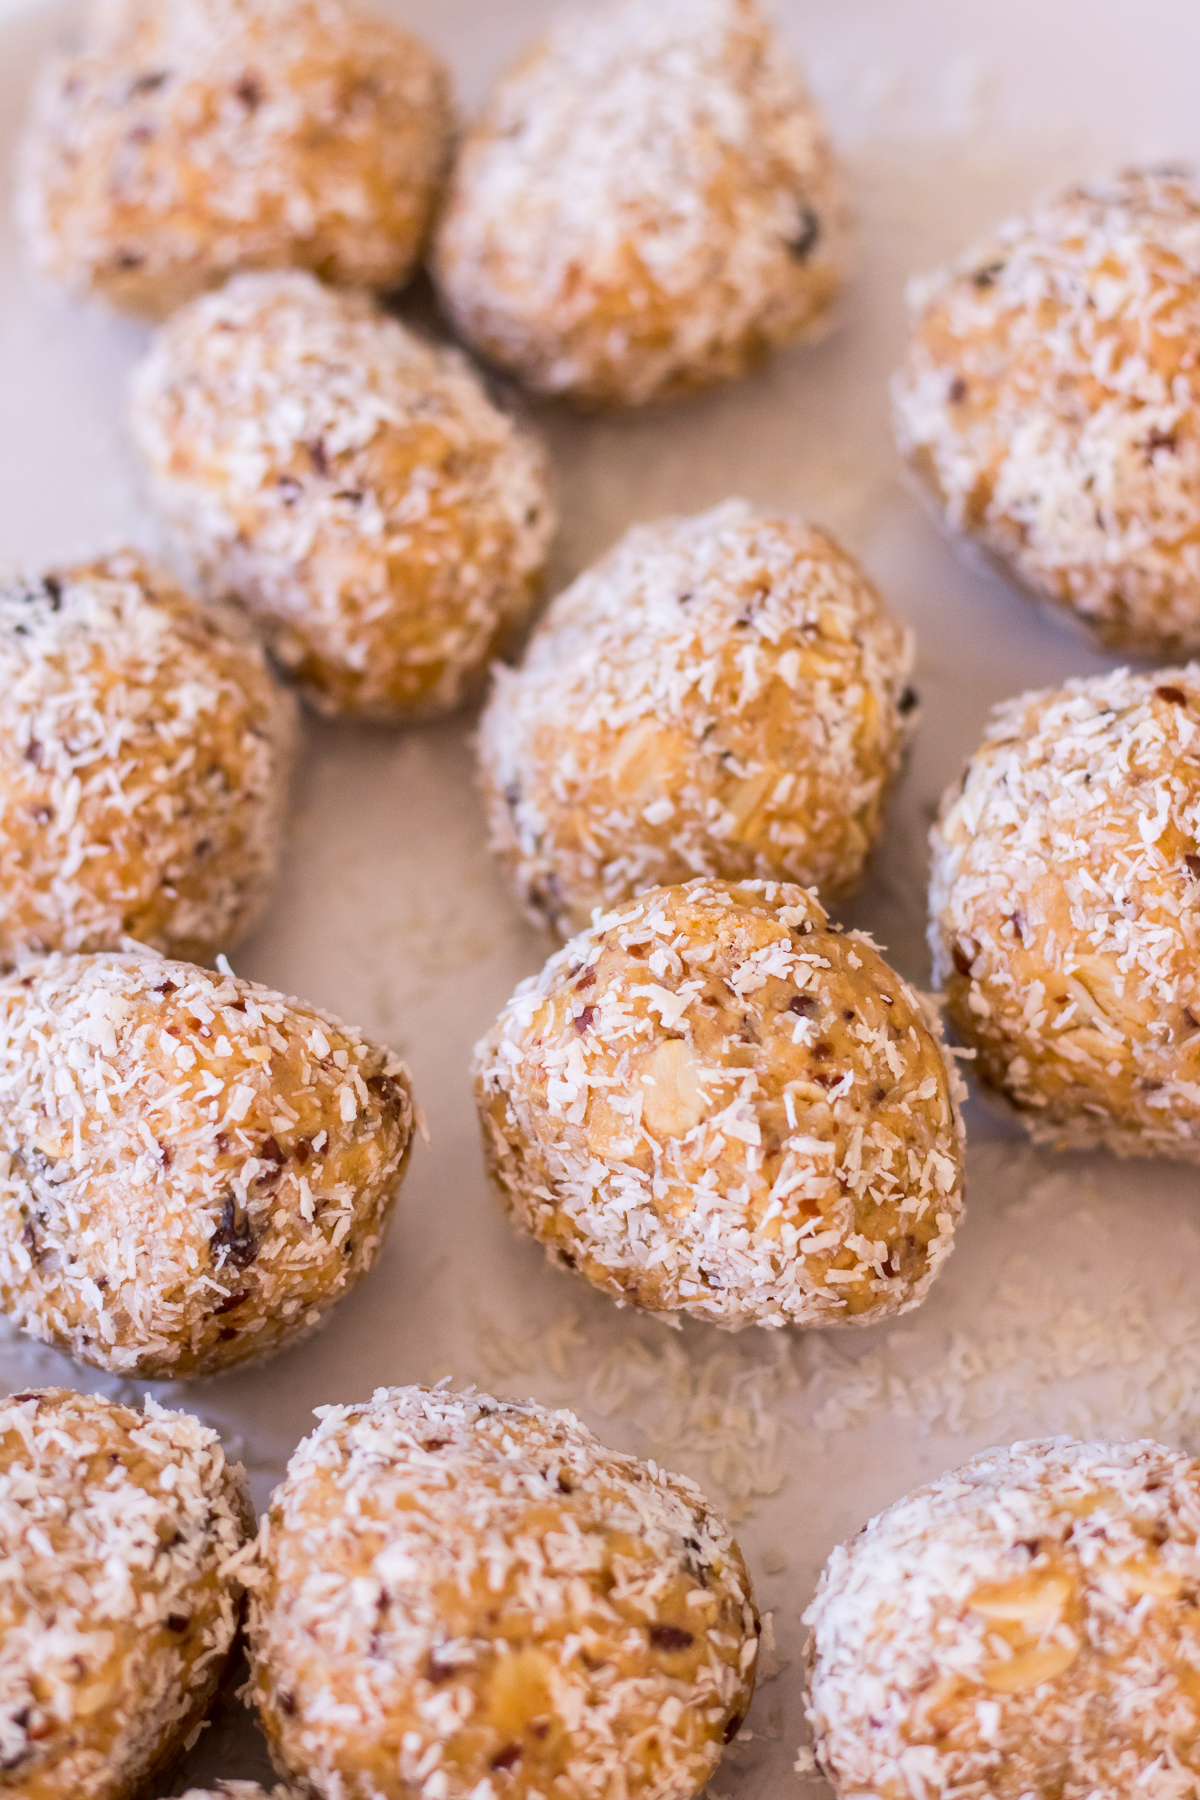 An image of energy balls coated in desiccated coconut